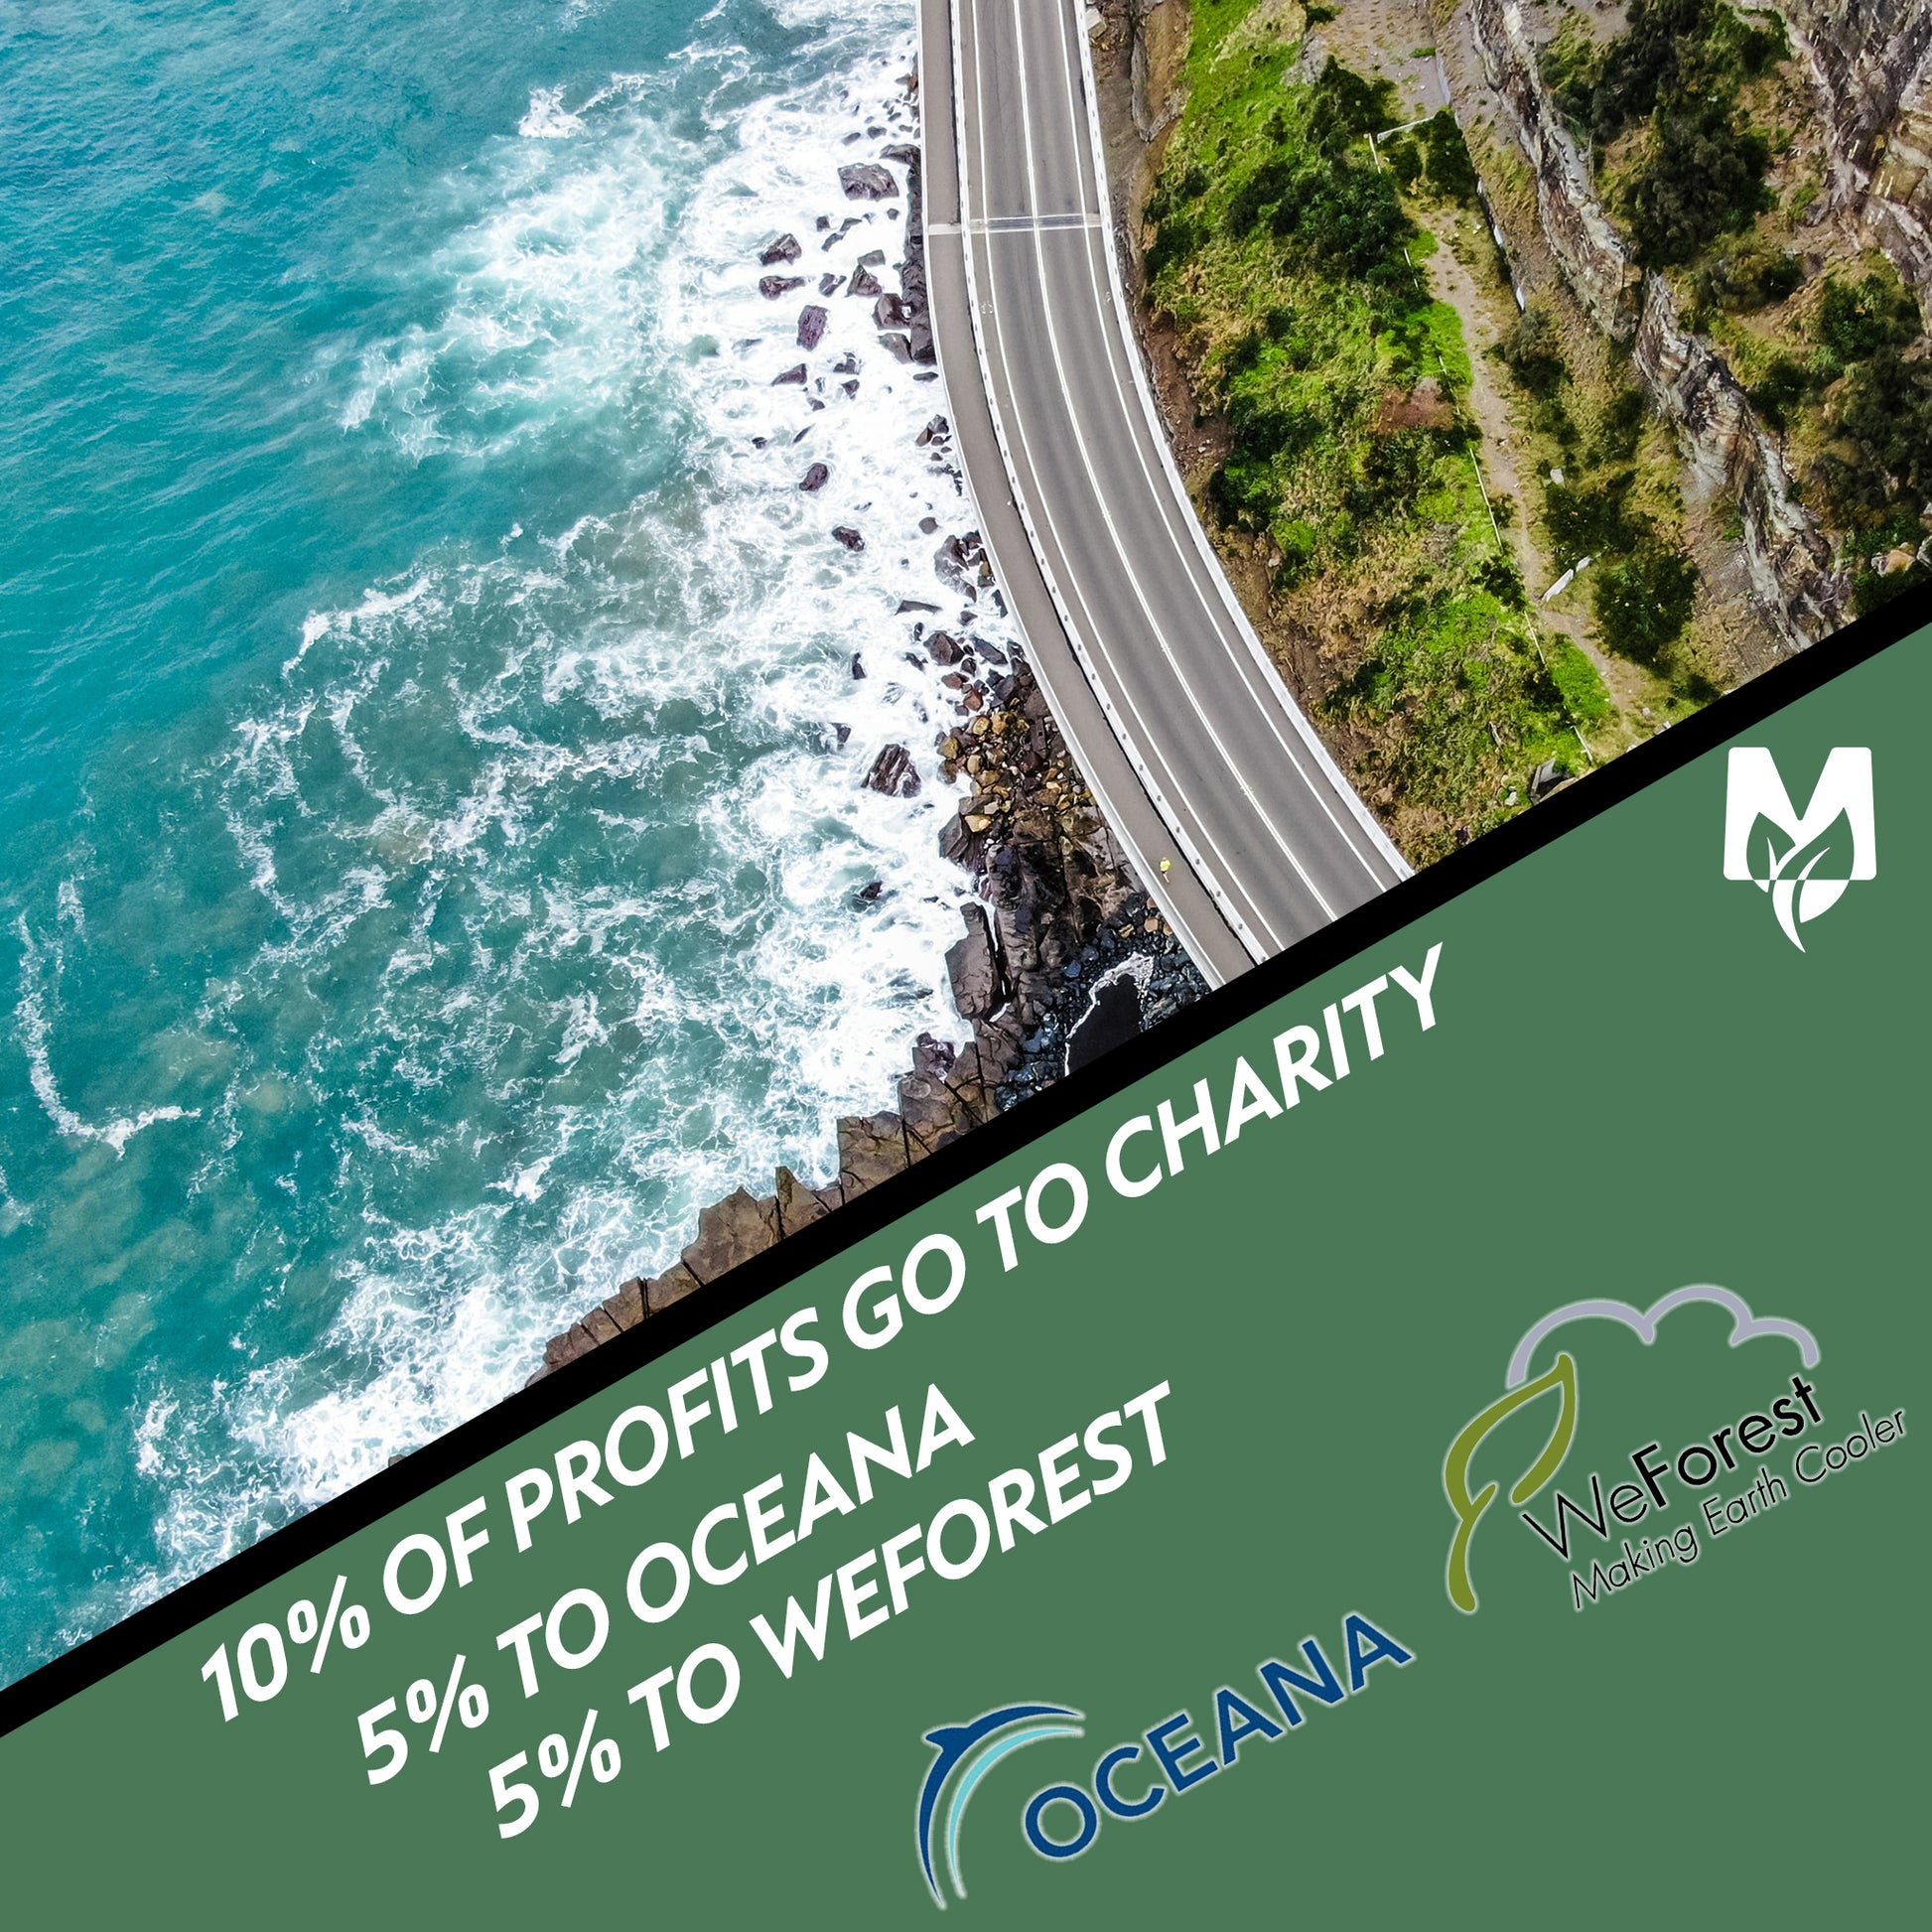 Motoreco charity pledge to oceana and weforest